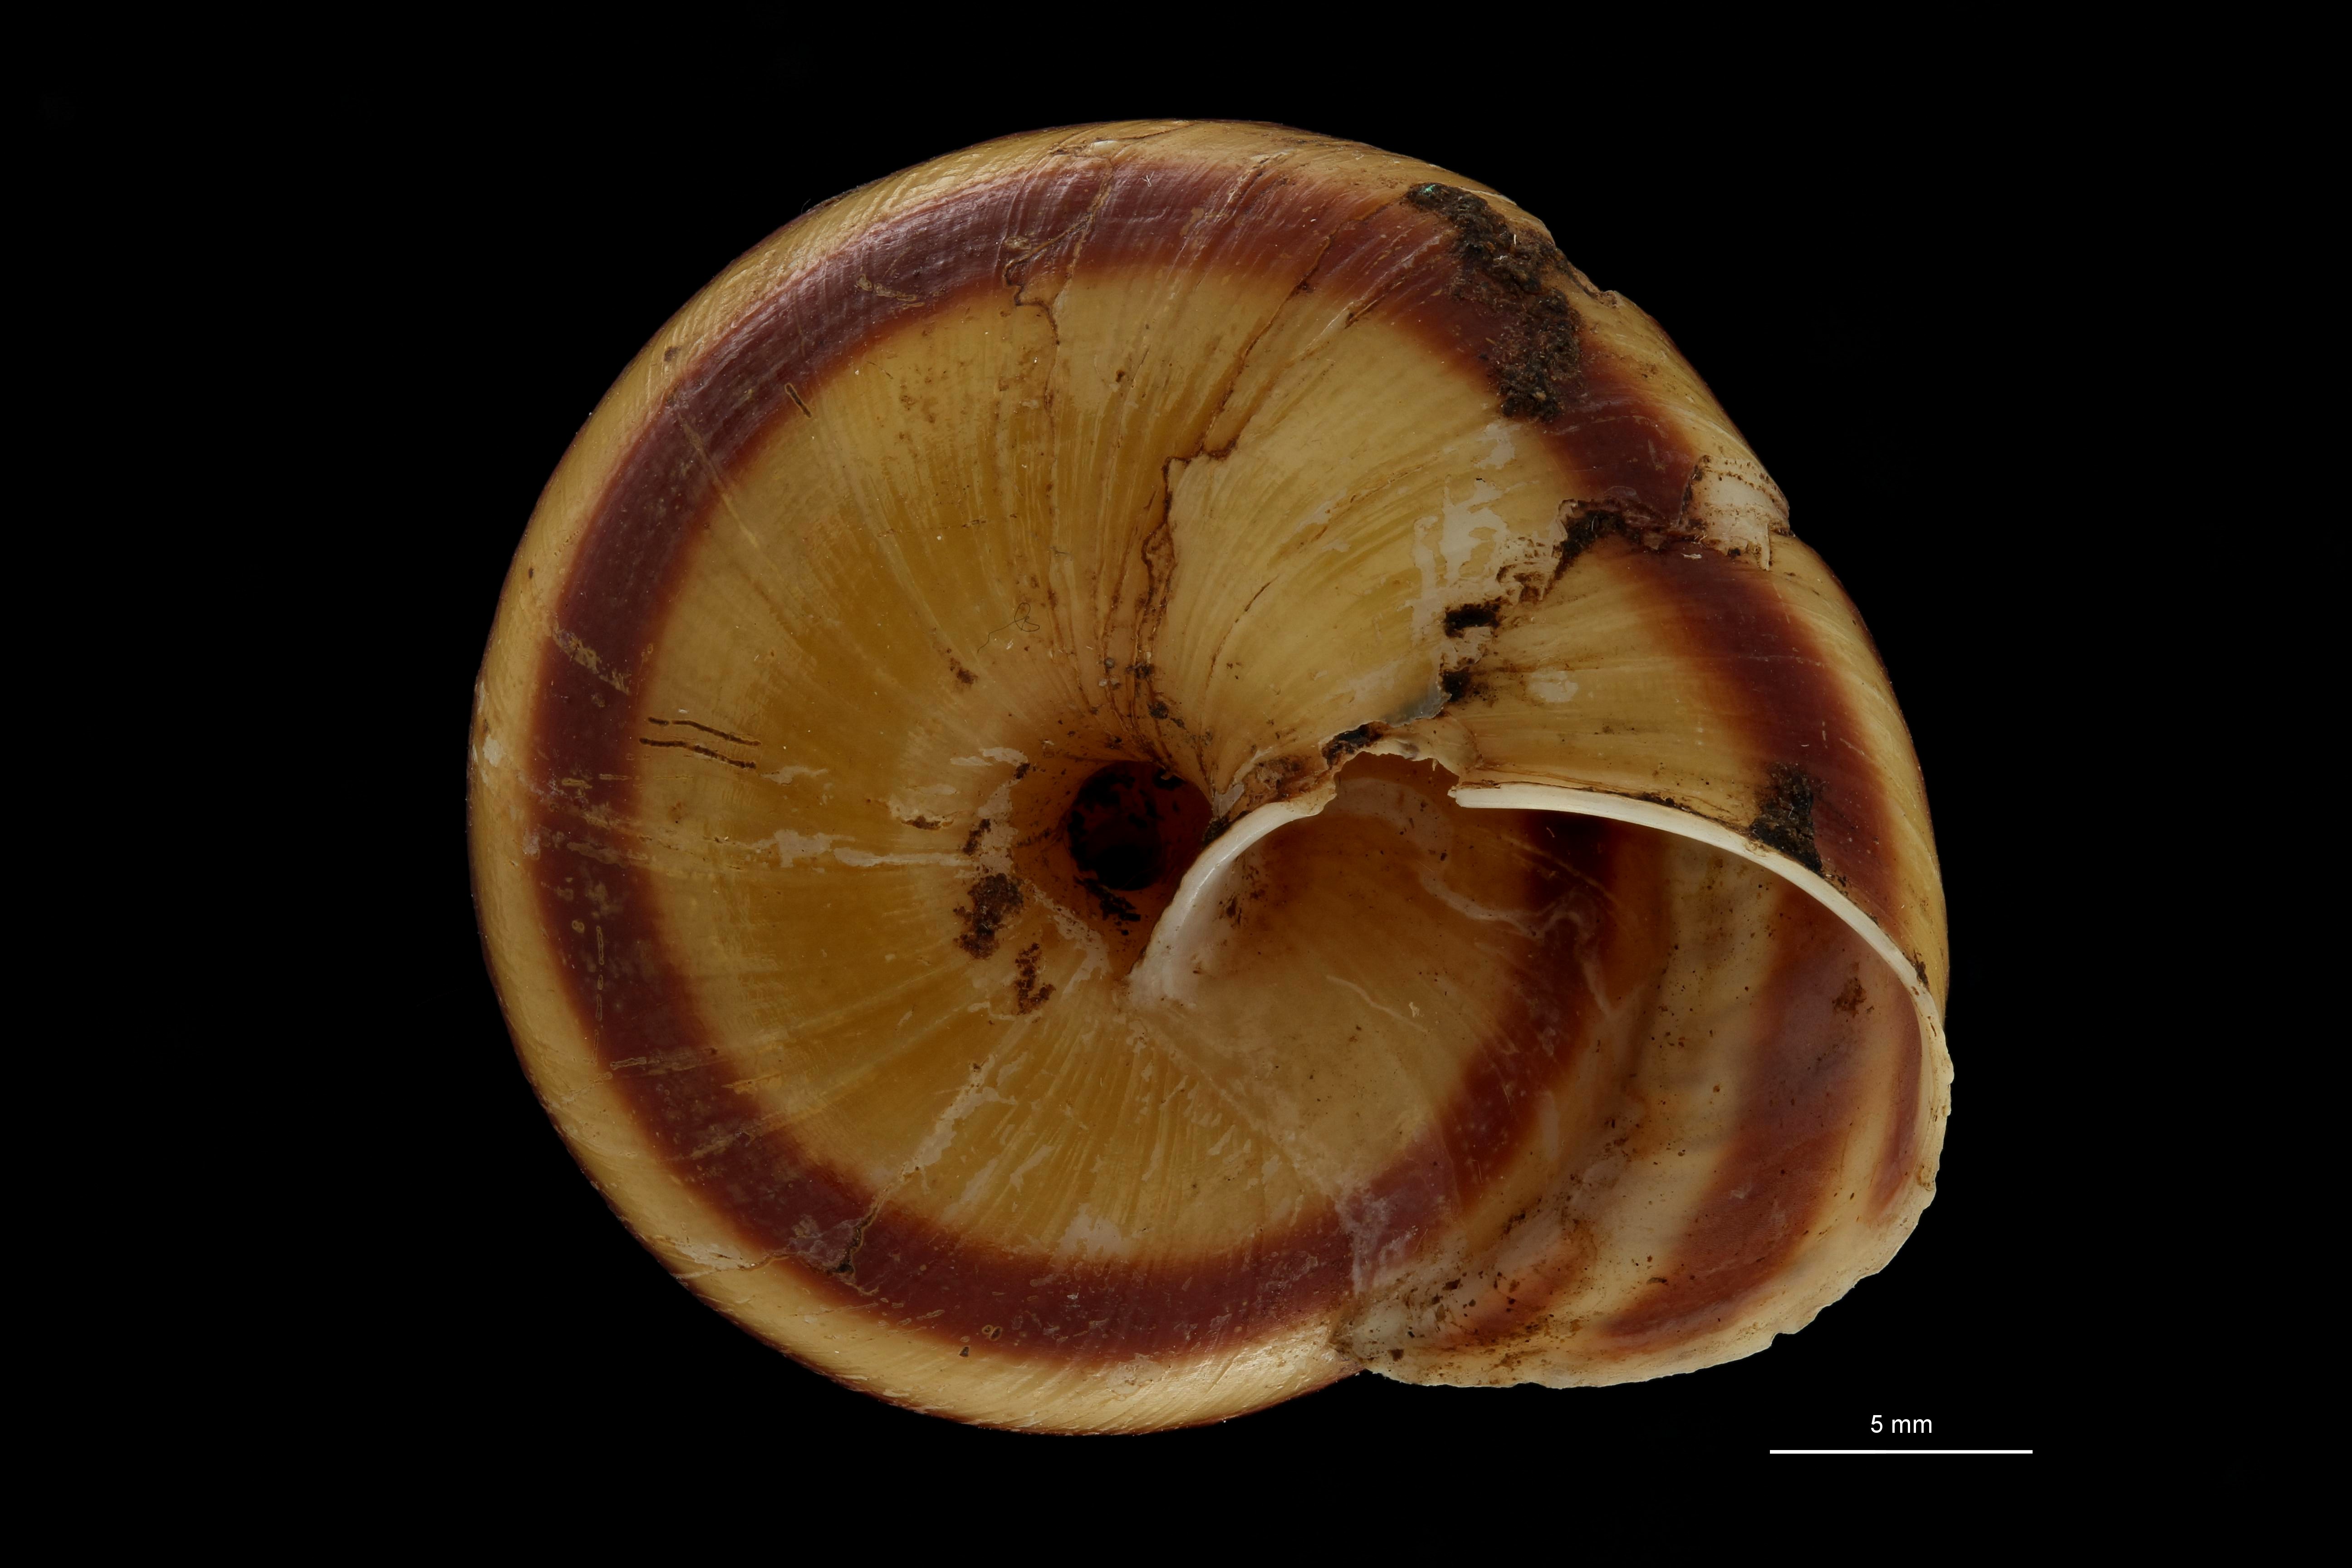 BE-RBINS-INV TYPE MT 709 Helix (Camaena) contractiva var. minor VENTRAL ZS PMax Scaled.jpg